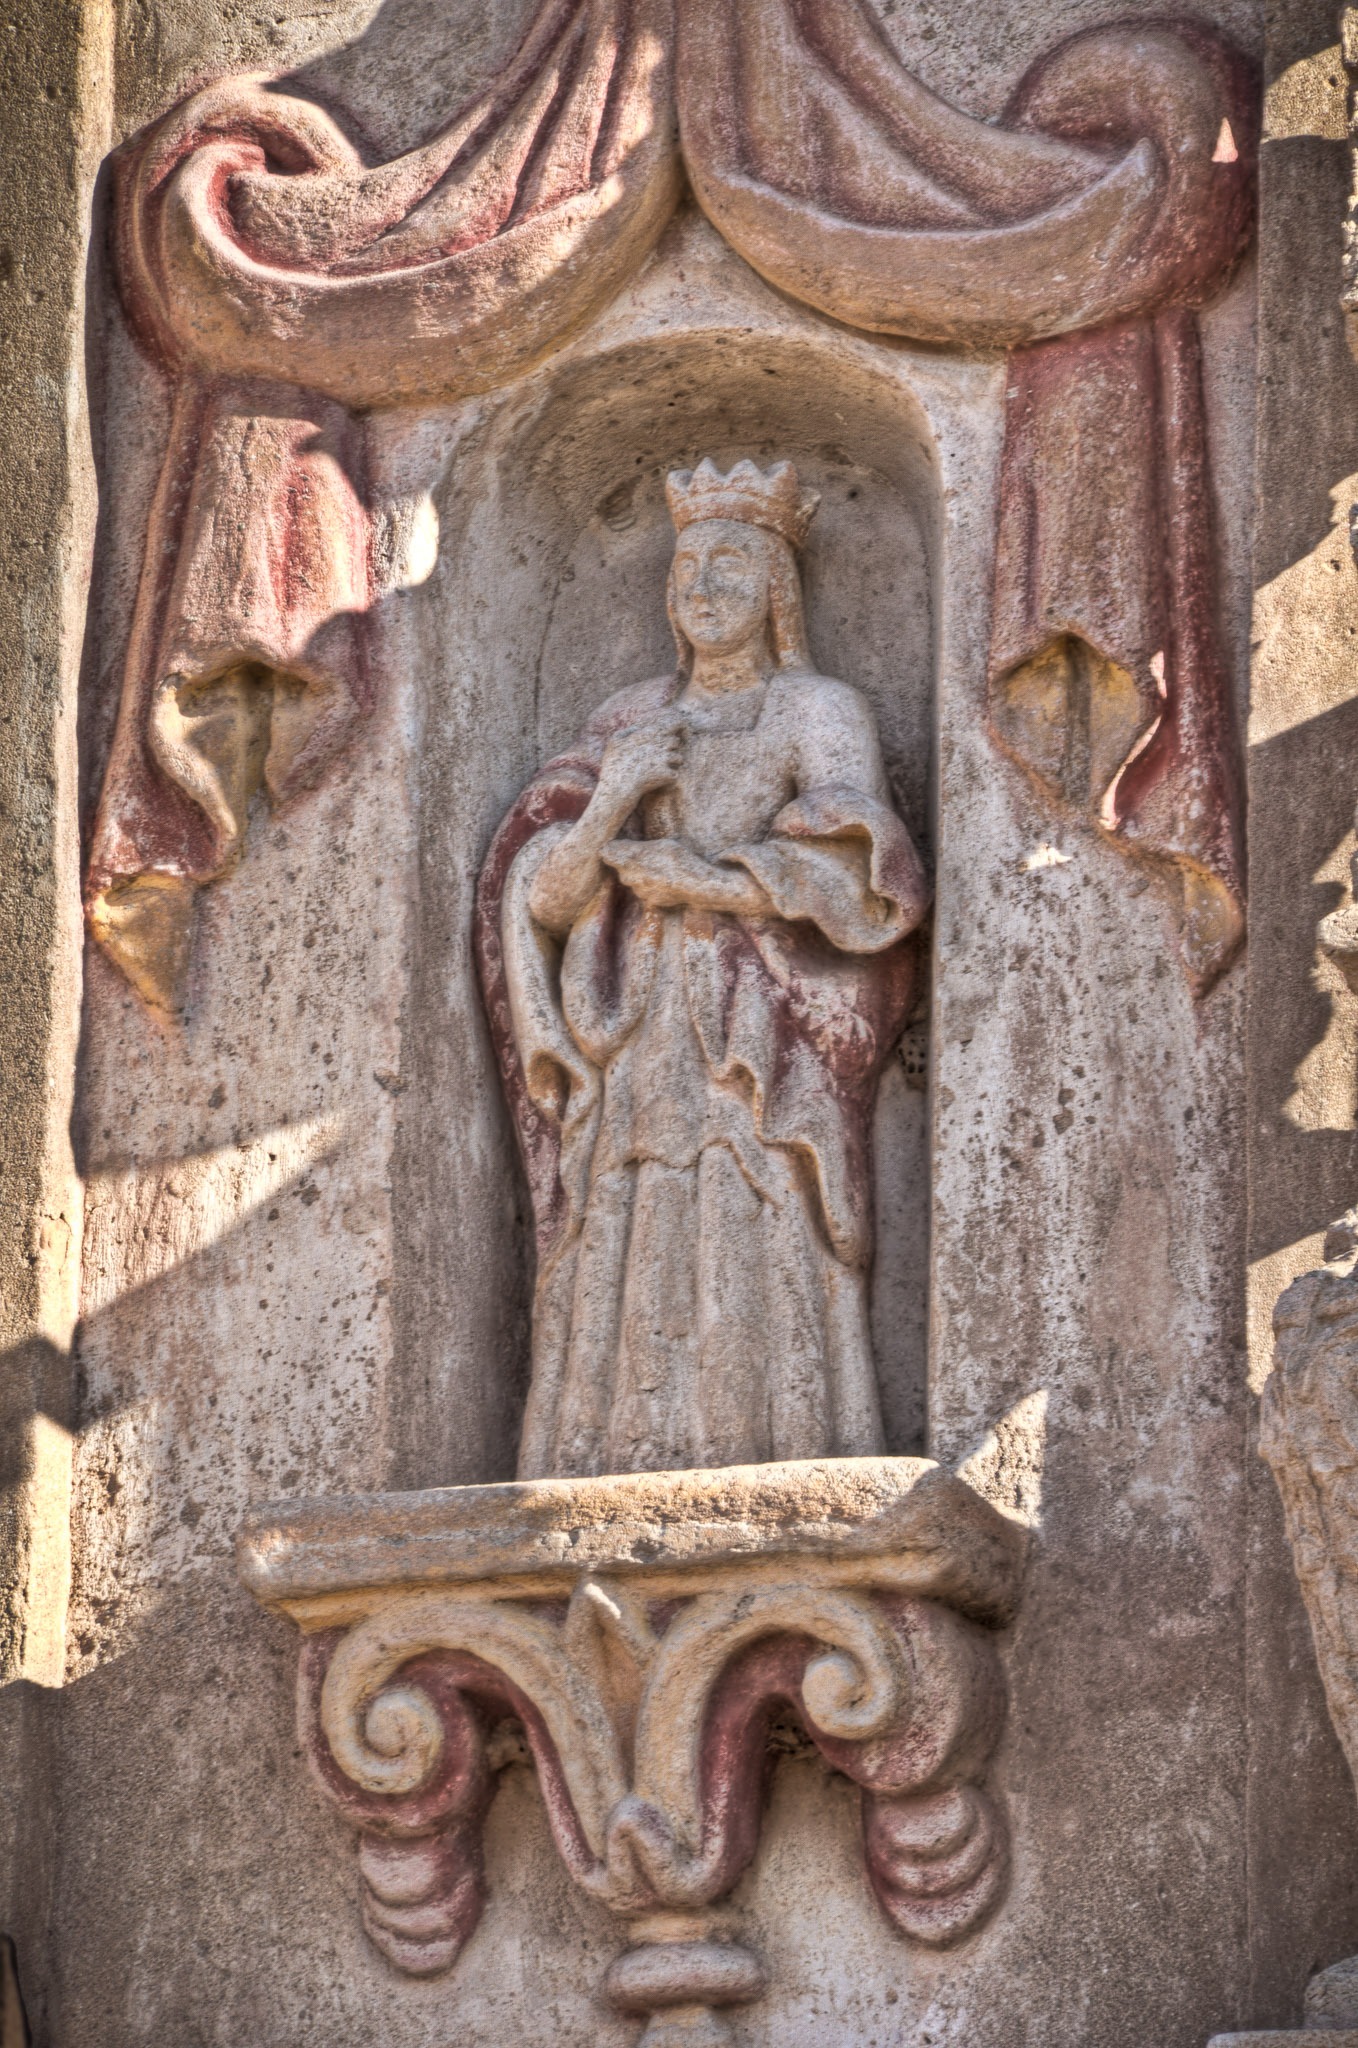 External detail at San Xavier del Bac (White Dove of the Desert), located south of Tucson, Arizona.